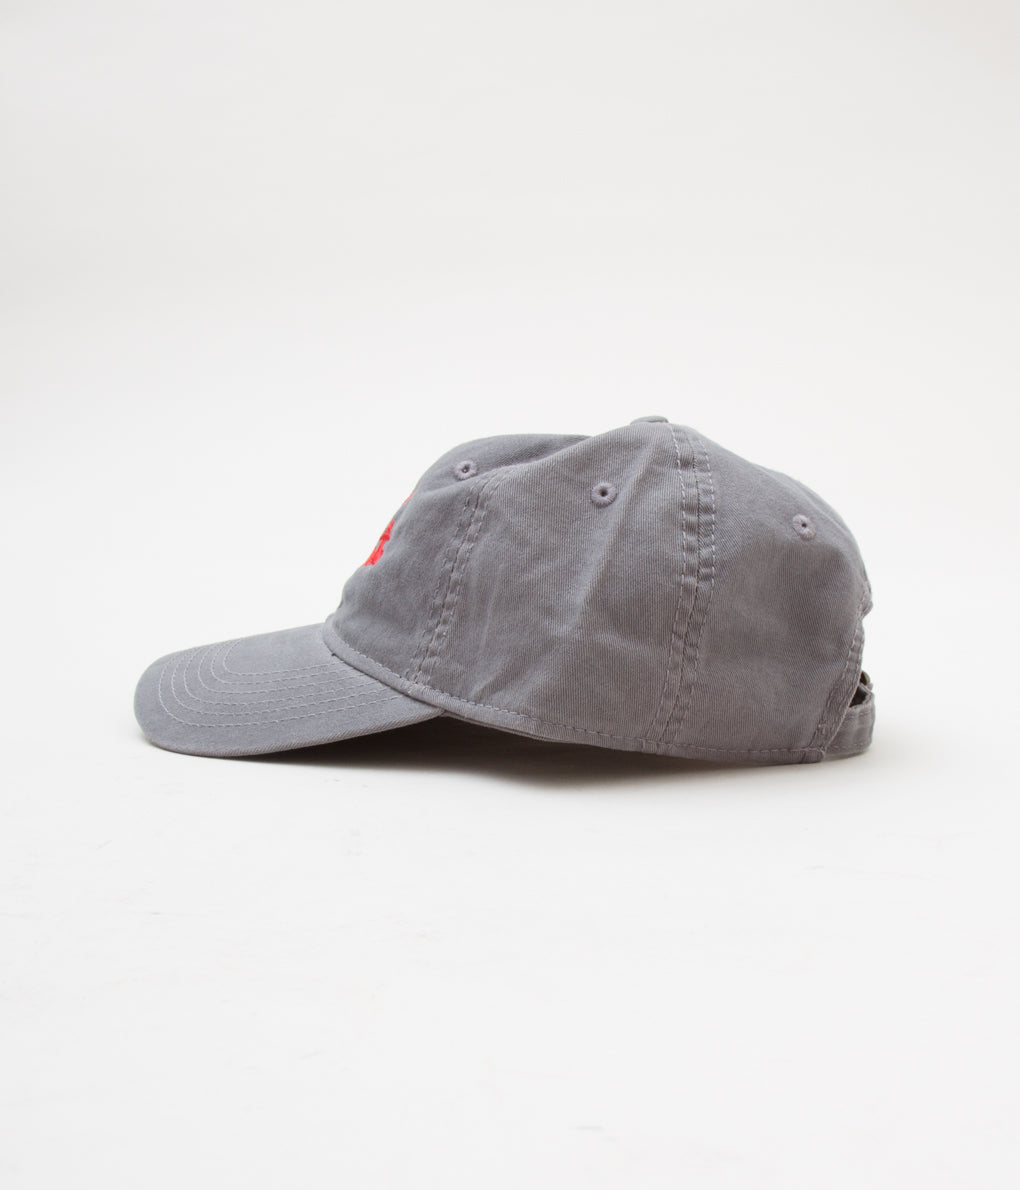 BLUESCENTRIC "JOHNNY WINTER 80S TOUR HAT" (GRAY)